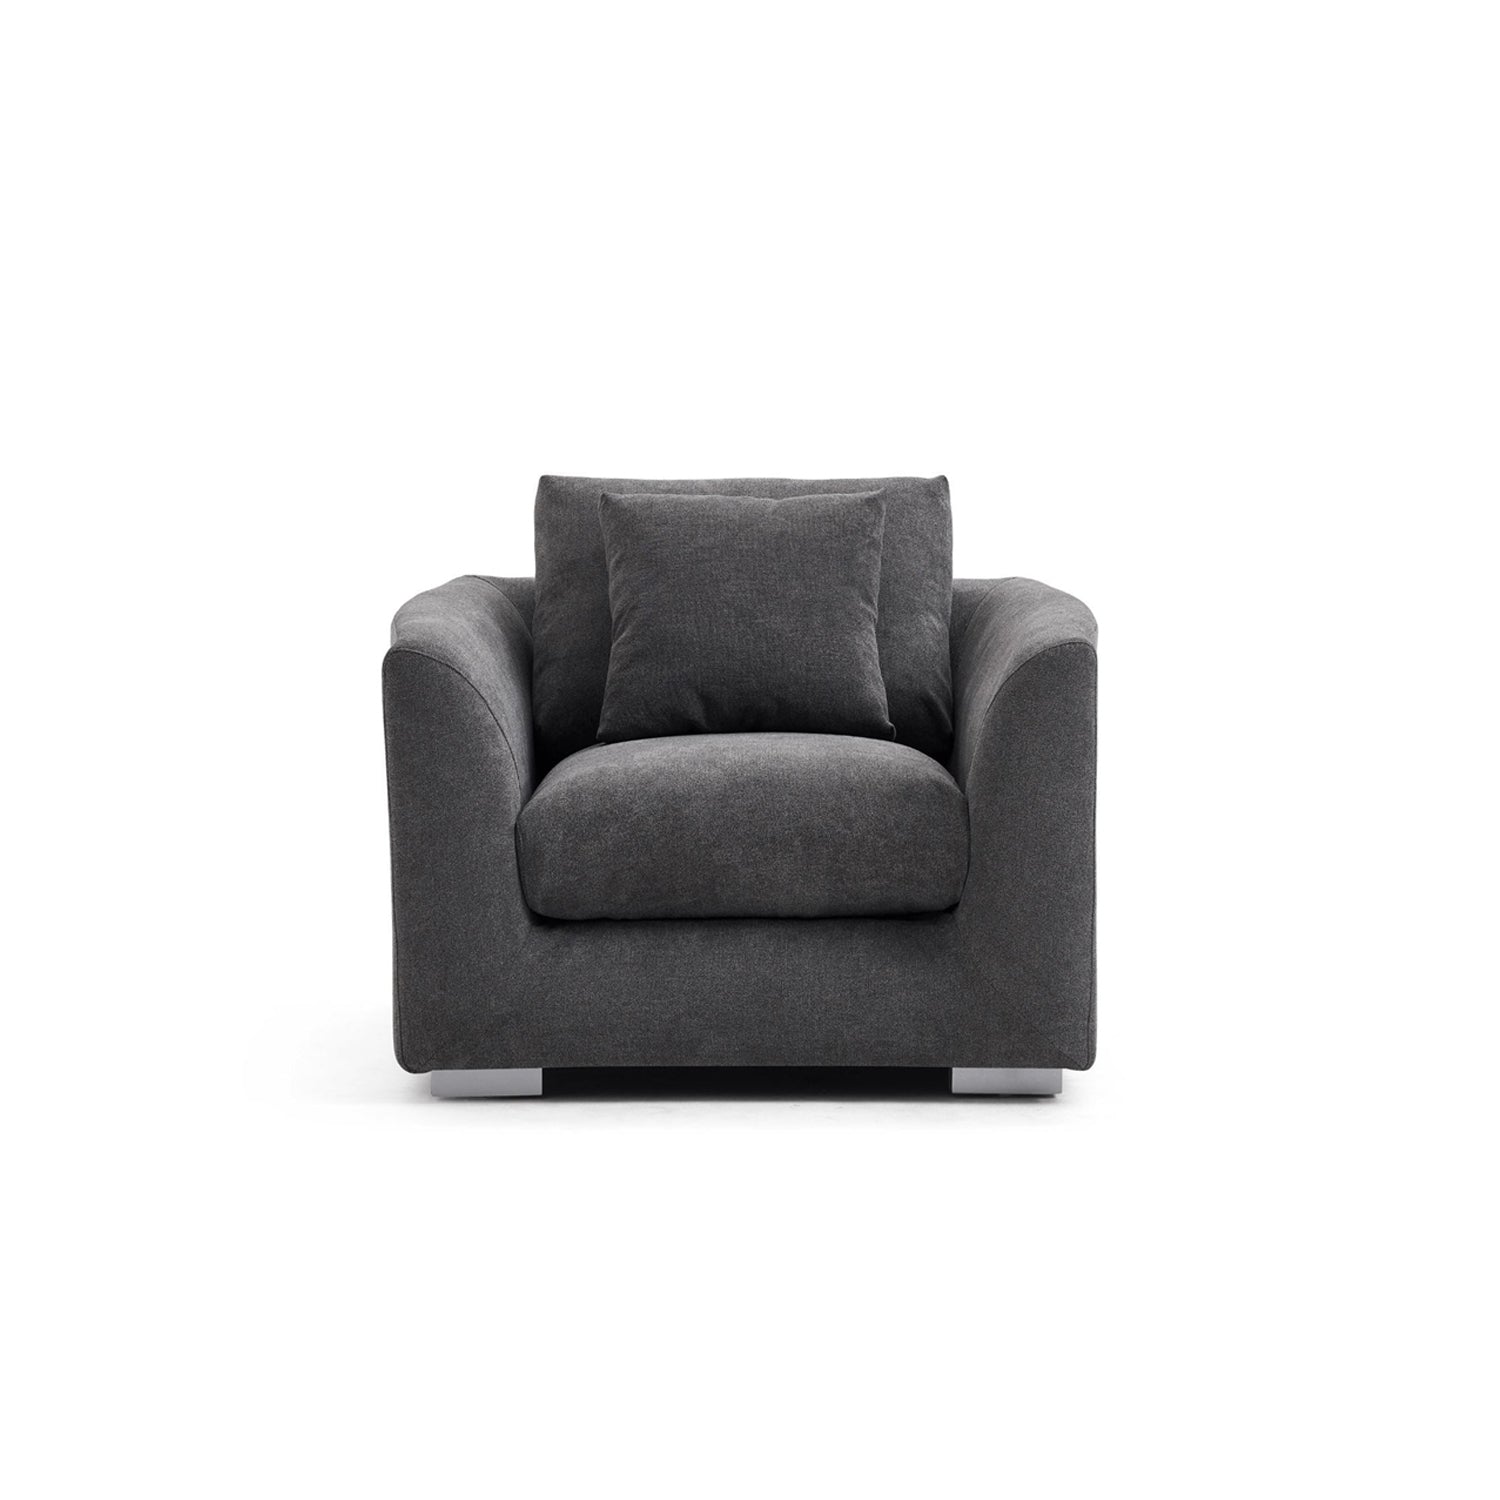 Feathers Armchair - Valyou 